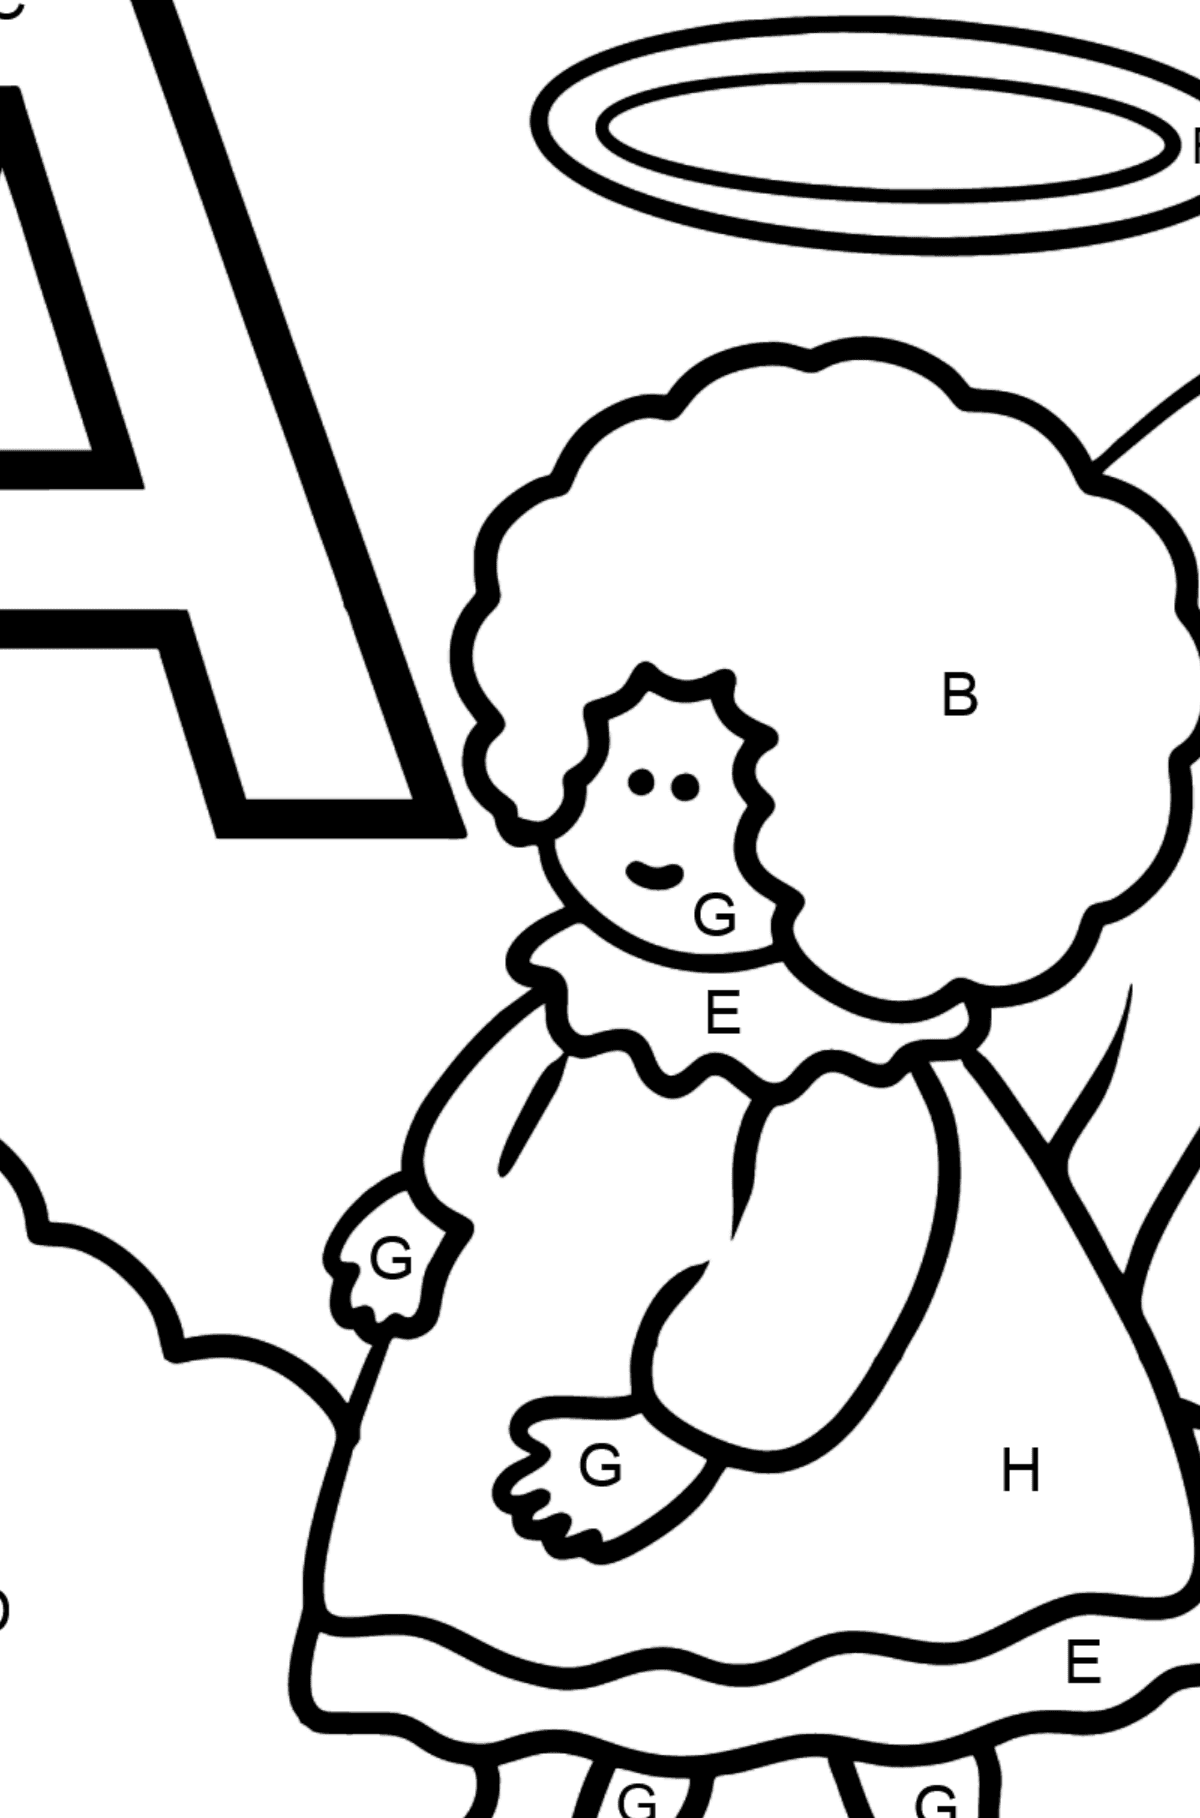 Portuguese Letter A coloring pages - ANJO - Coloring by Letters for Kids